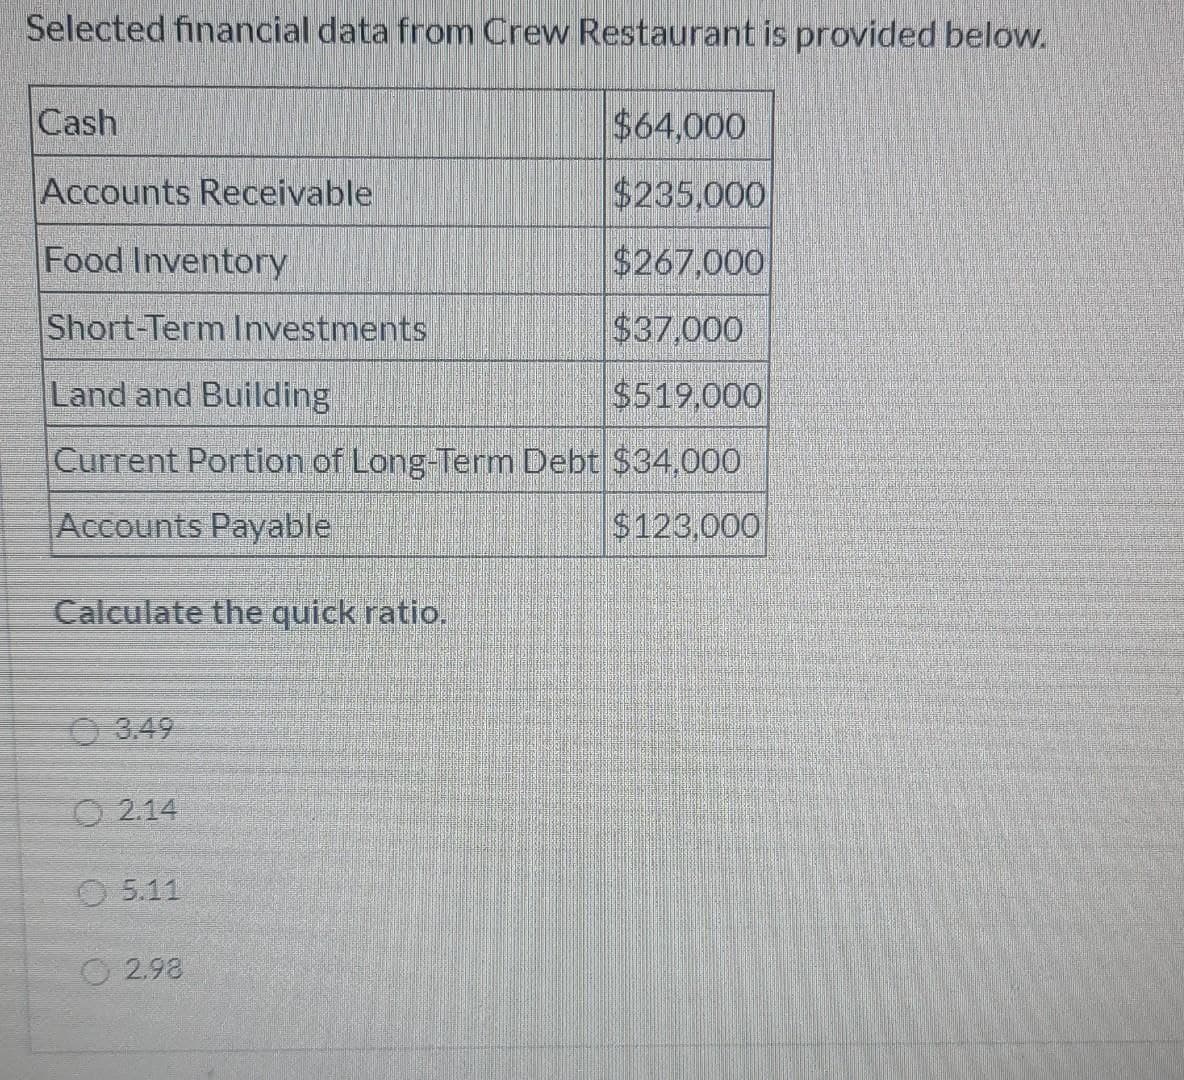 Selected financial data from Crew Restaurant is provided below.
Cash
Accounts Receivable
Food Inventory
Short-Term Investments
Land and Building
Current Portion of Long-Term Debt $34,000
Accounts Payable
$123,000
Calculate the quick ratio.
3.49
2.14
05.11
$64,000
$235,000
$267,000
$37,000
$519,000
O2.98